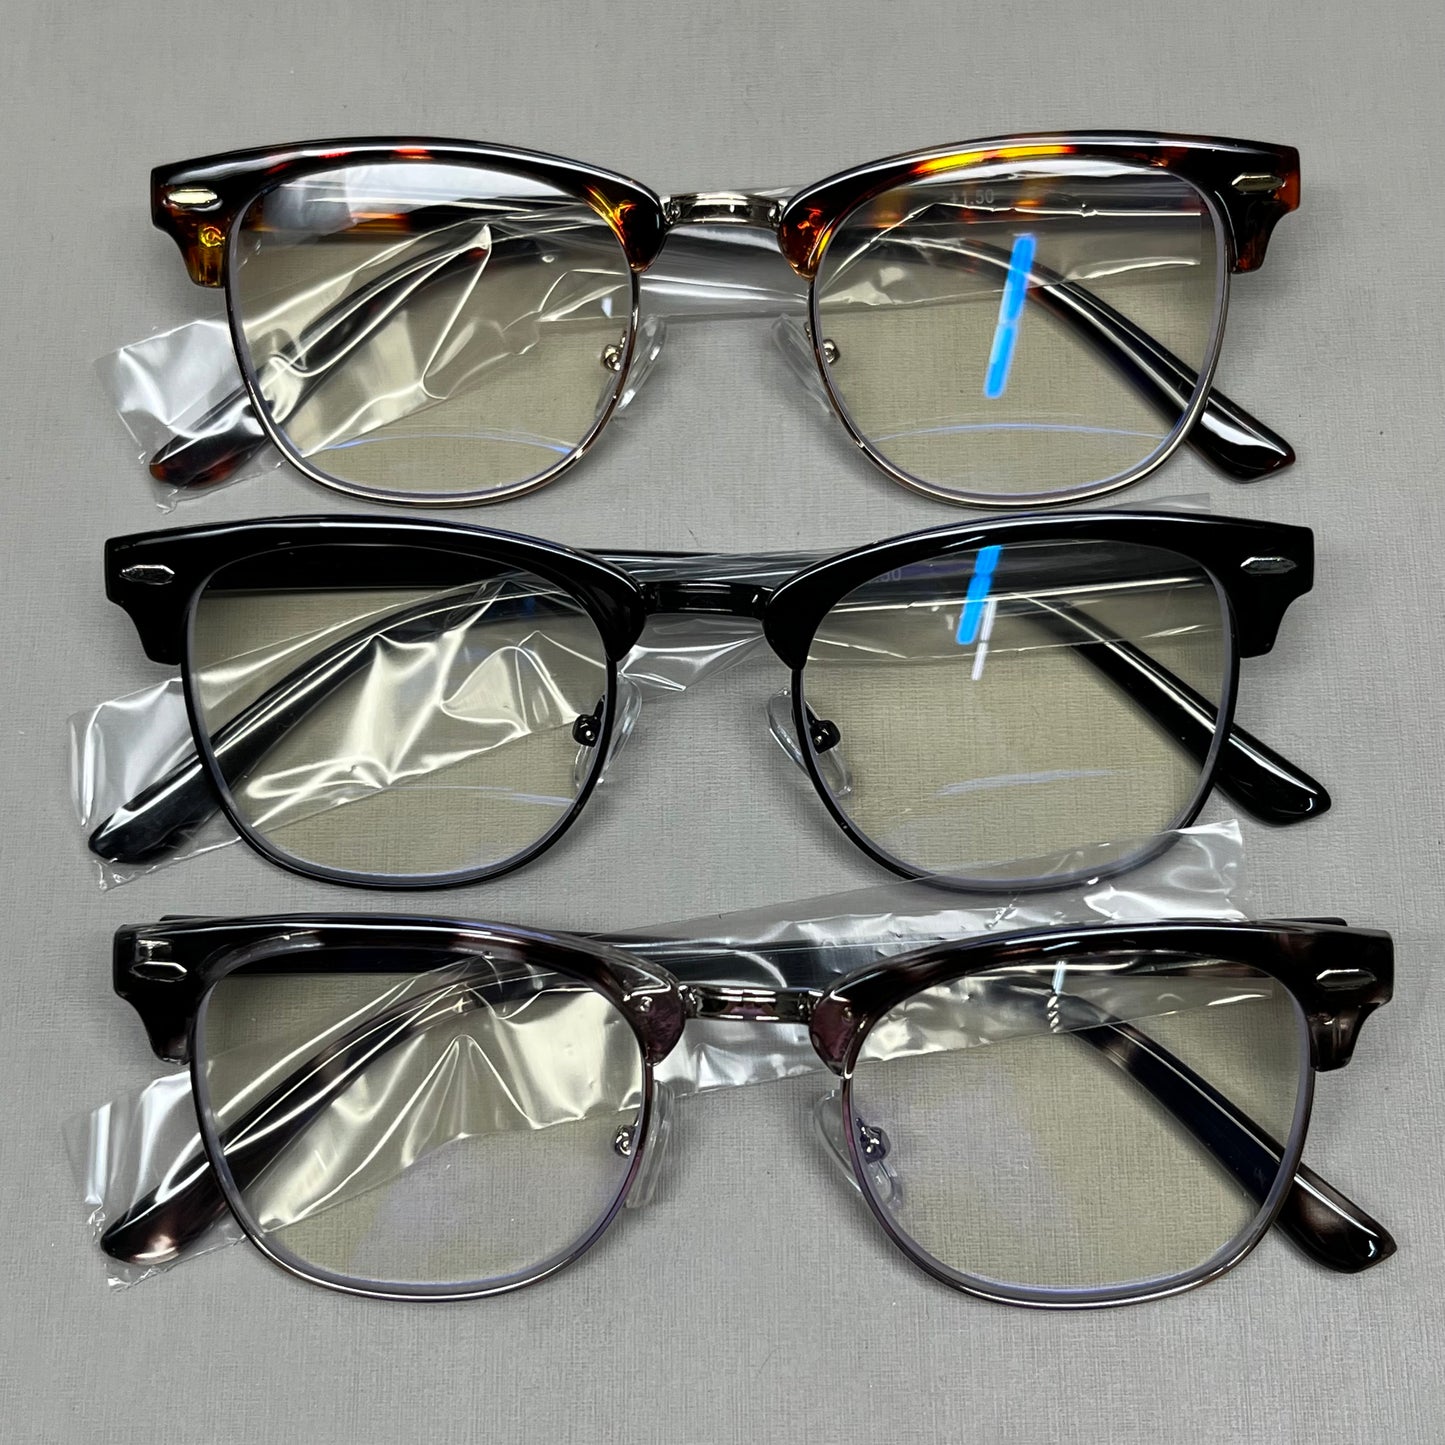 ZXYOO 3 Pack Classic Retro Reading Glasses 1.5x Magnification Strength (New)